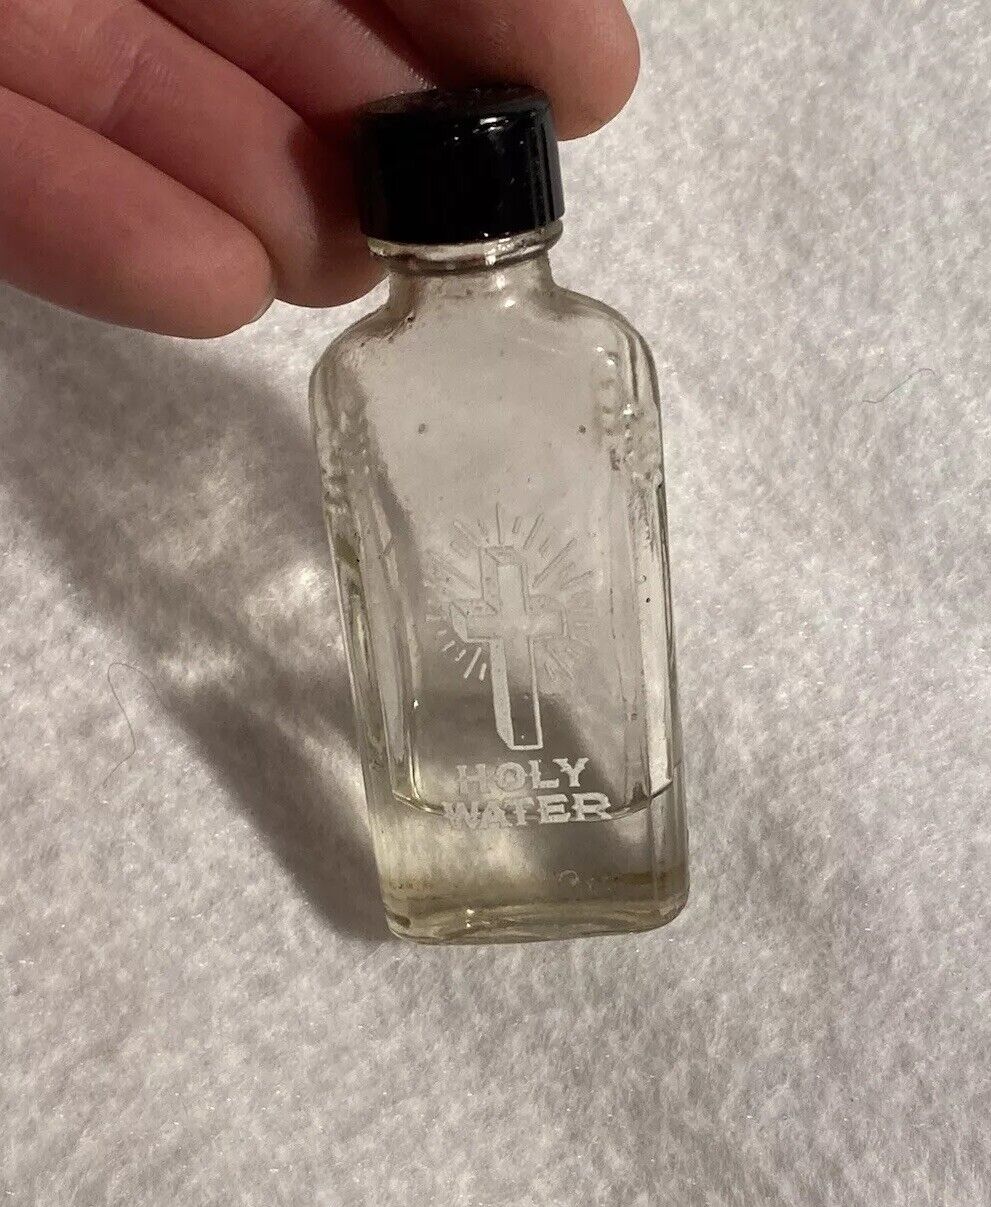 VINTAGE GLASS HOLY WATER BOTTLE  CROSS WITH Cracked CAP CATHOLIC